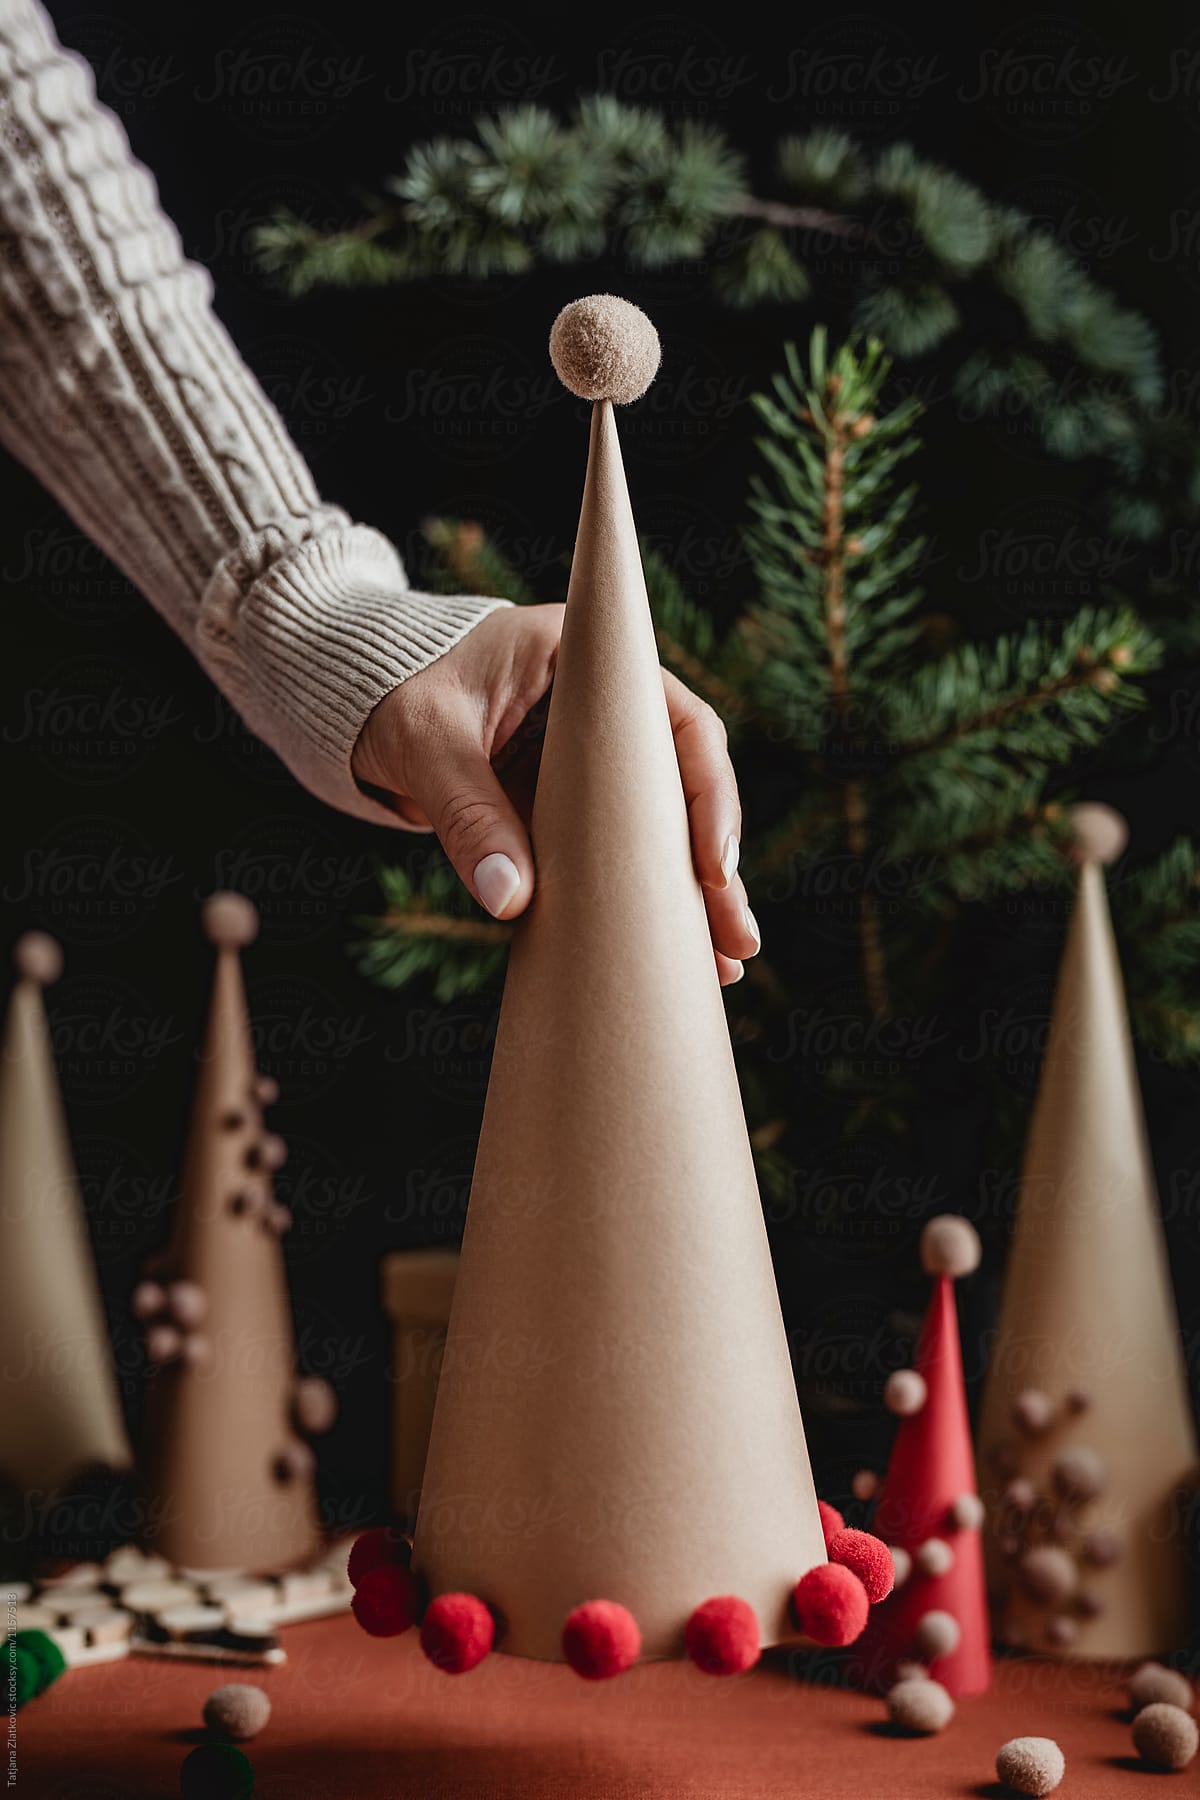 Hand is holding Christmas cone